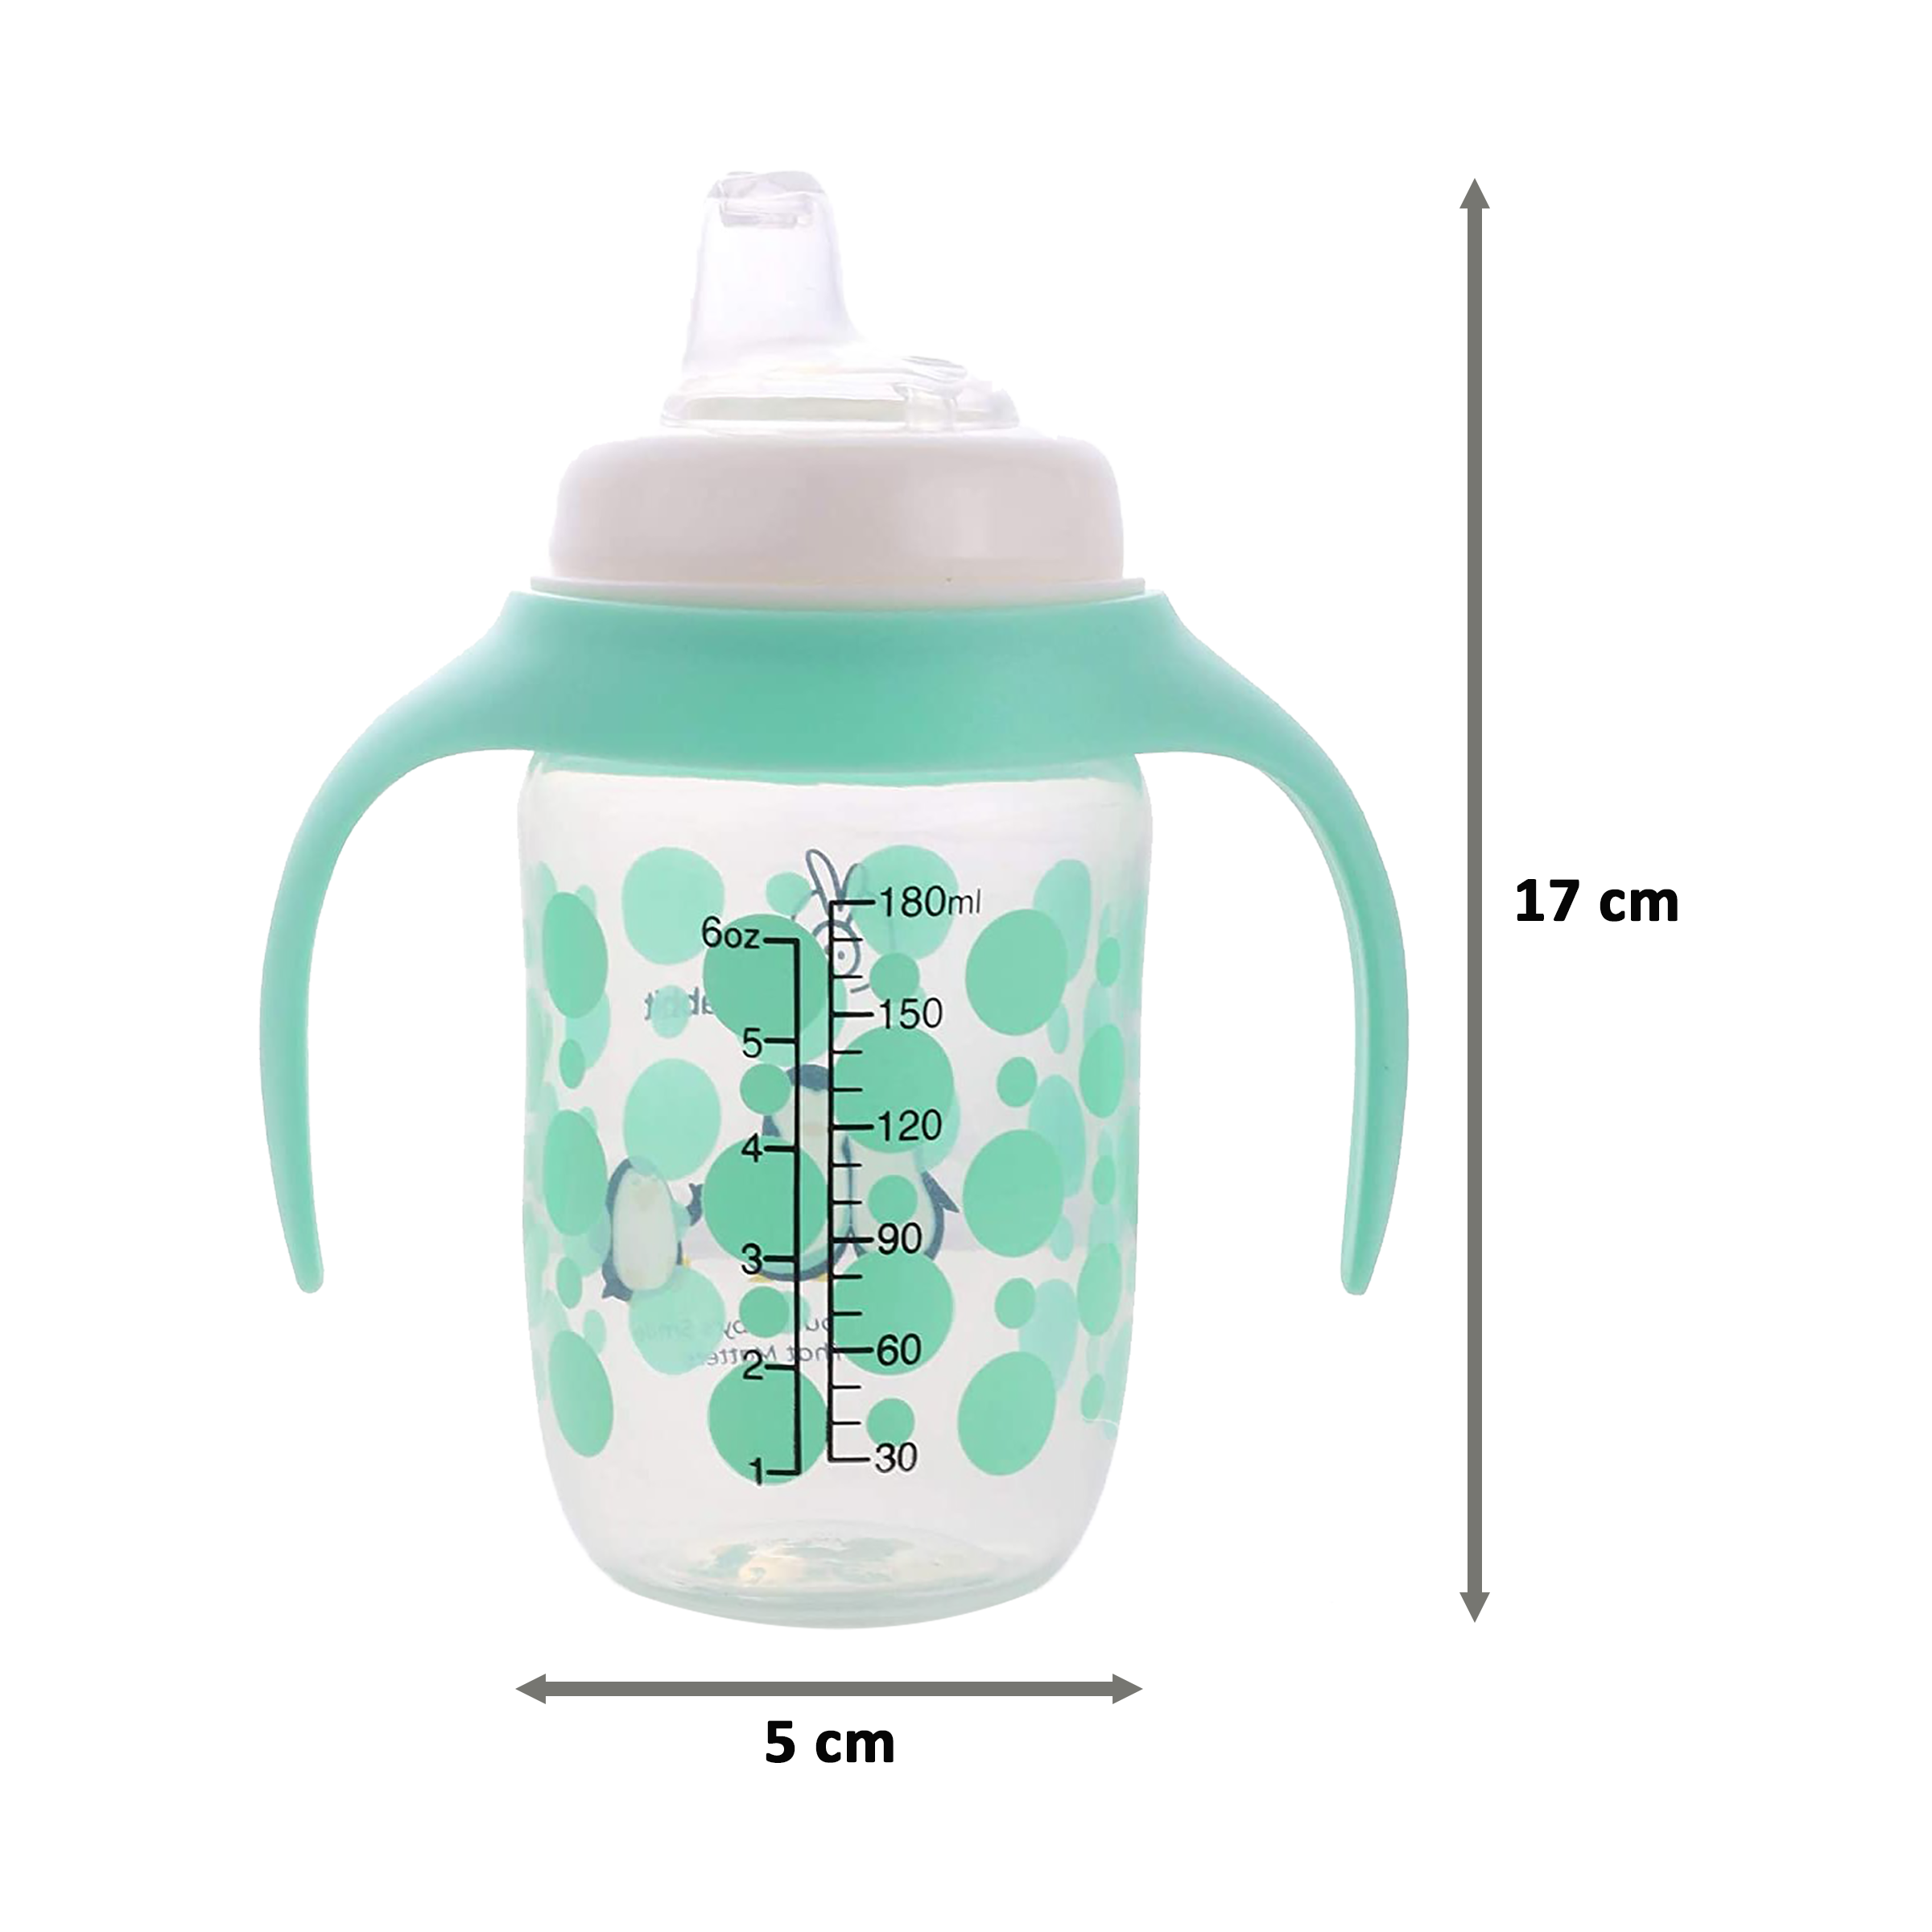 R for Rabbit Penguin Spout 180ml Baby Feeding Bottle (Anti Spill Hygienic Soft Silicone Spout, SSPGG01, Green)_2